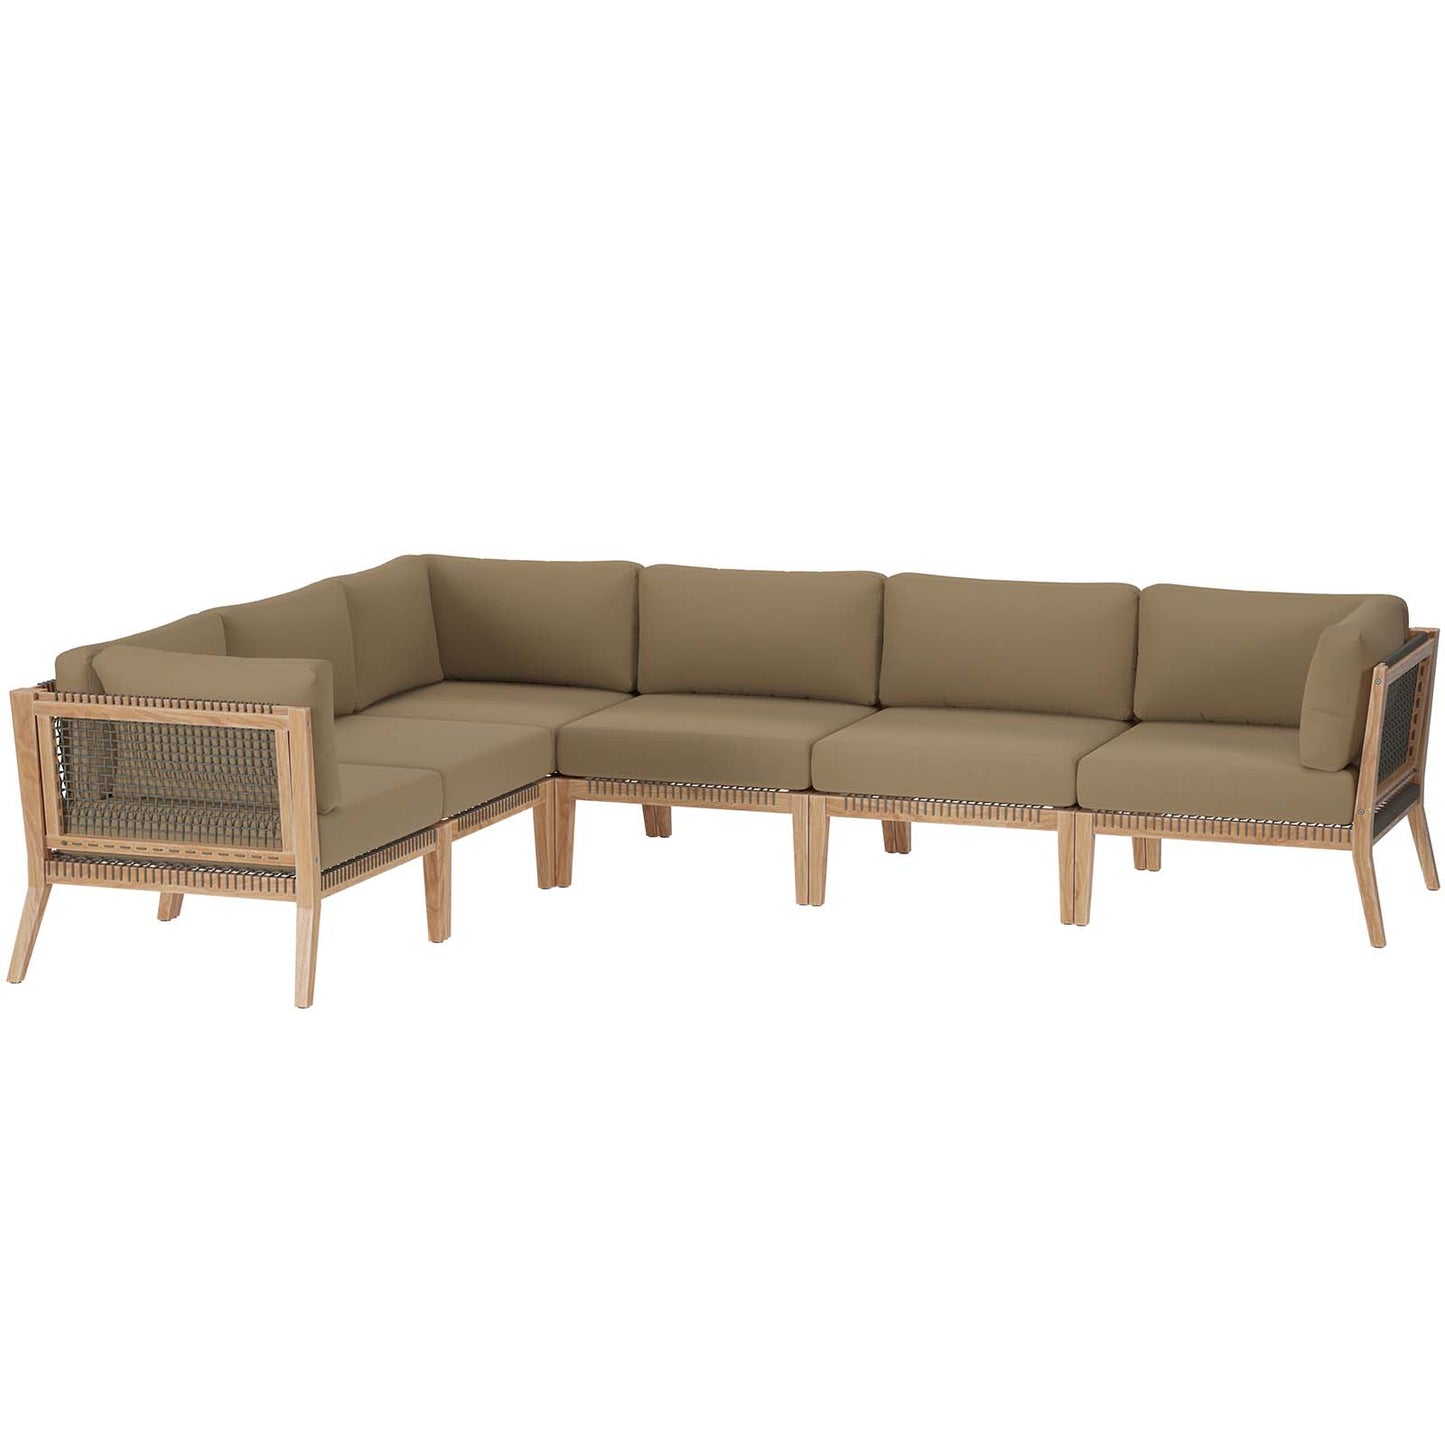 Clearwater Outdoor Patio Teak Wood 6-Piece Sectional Sofa Gray Light Brown EEI-6125-GRY-LBR